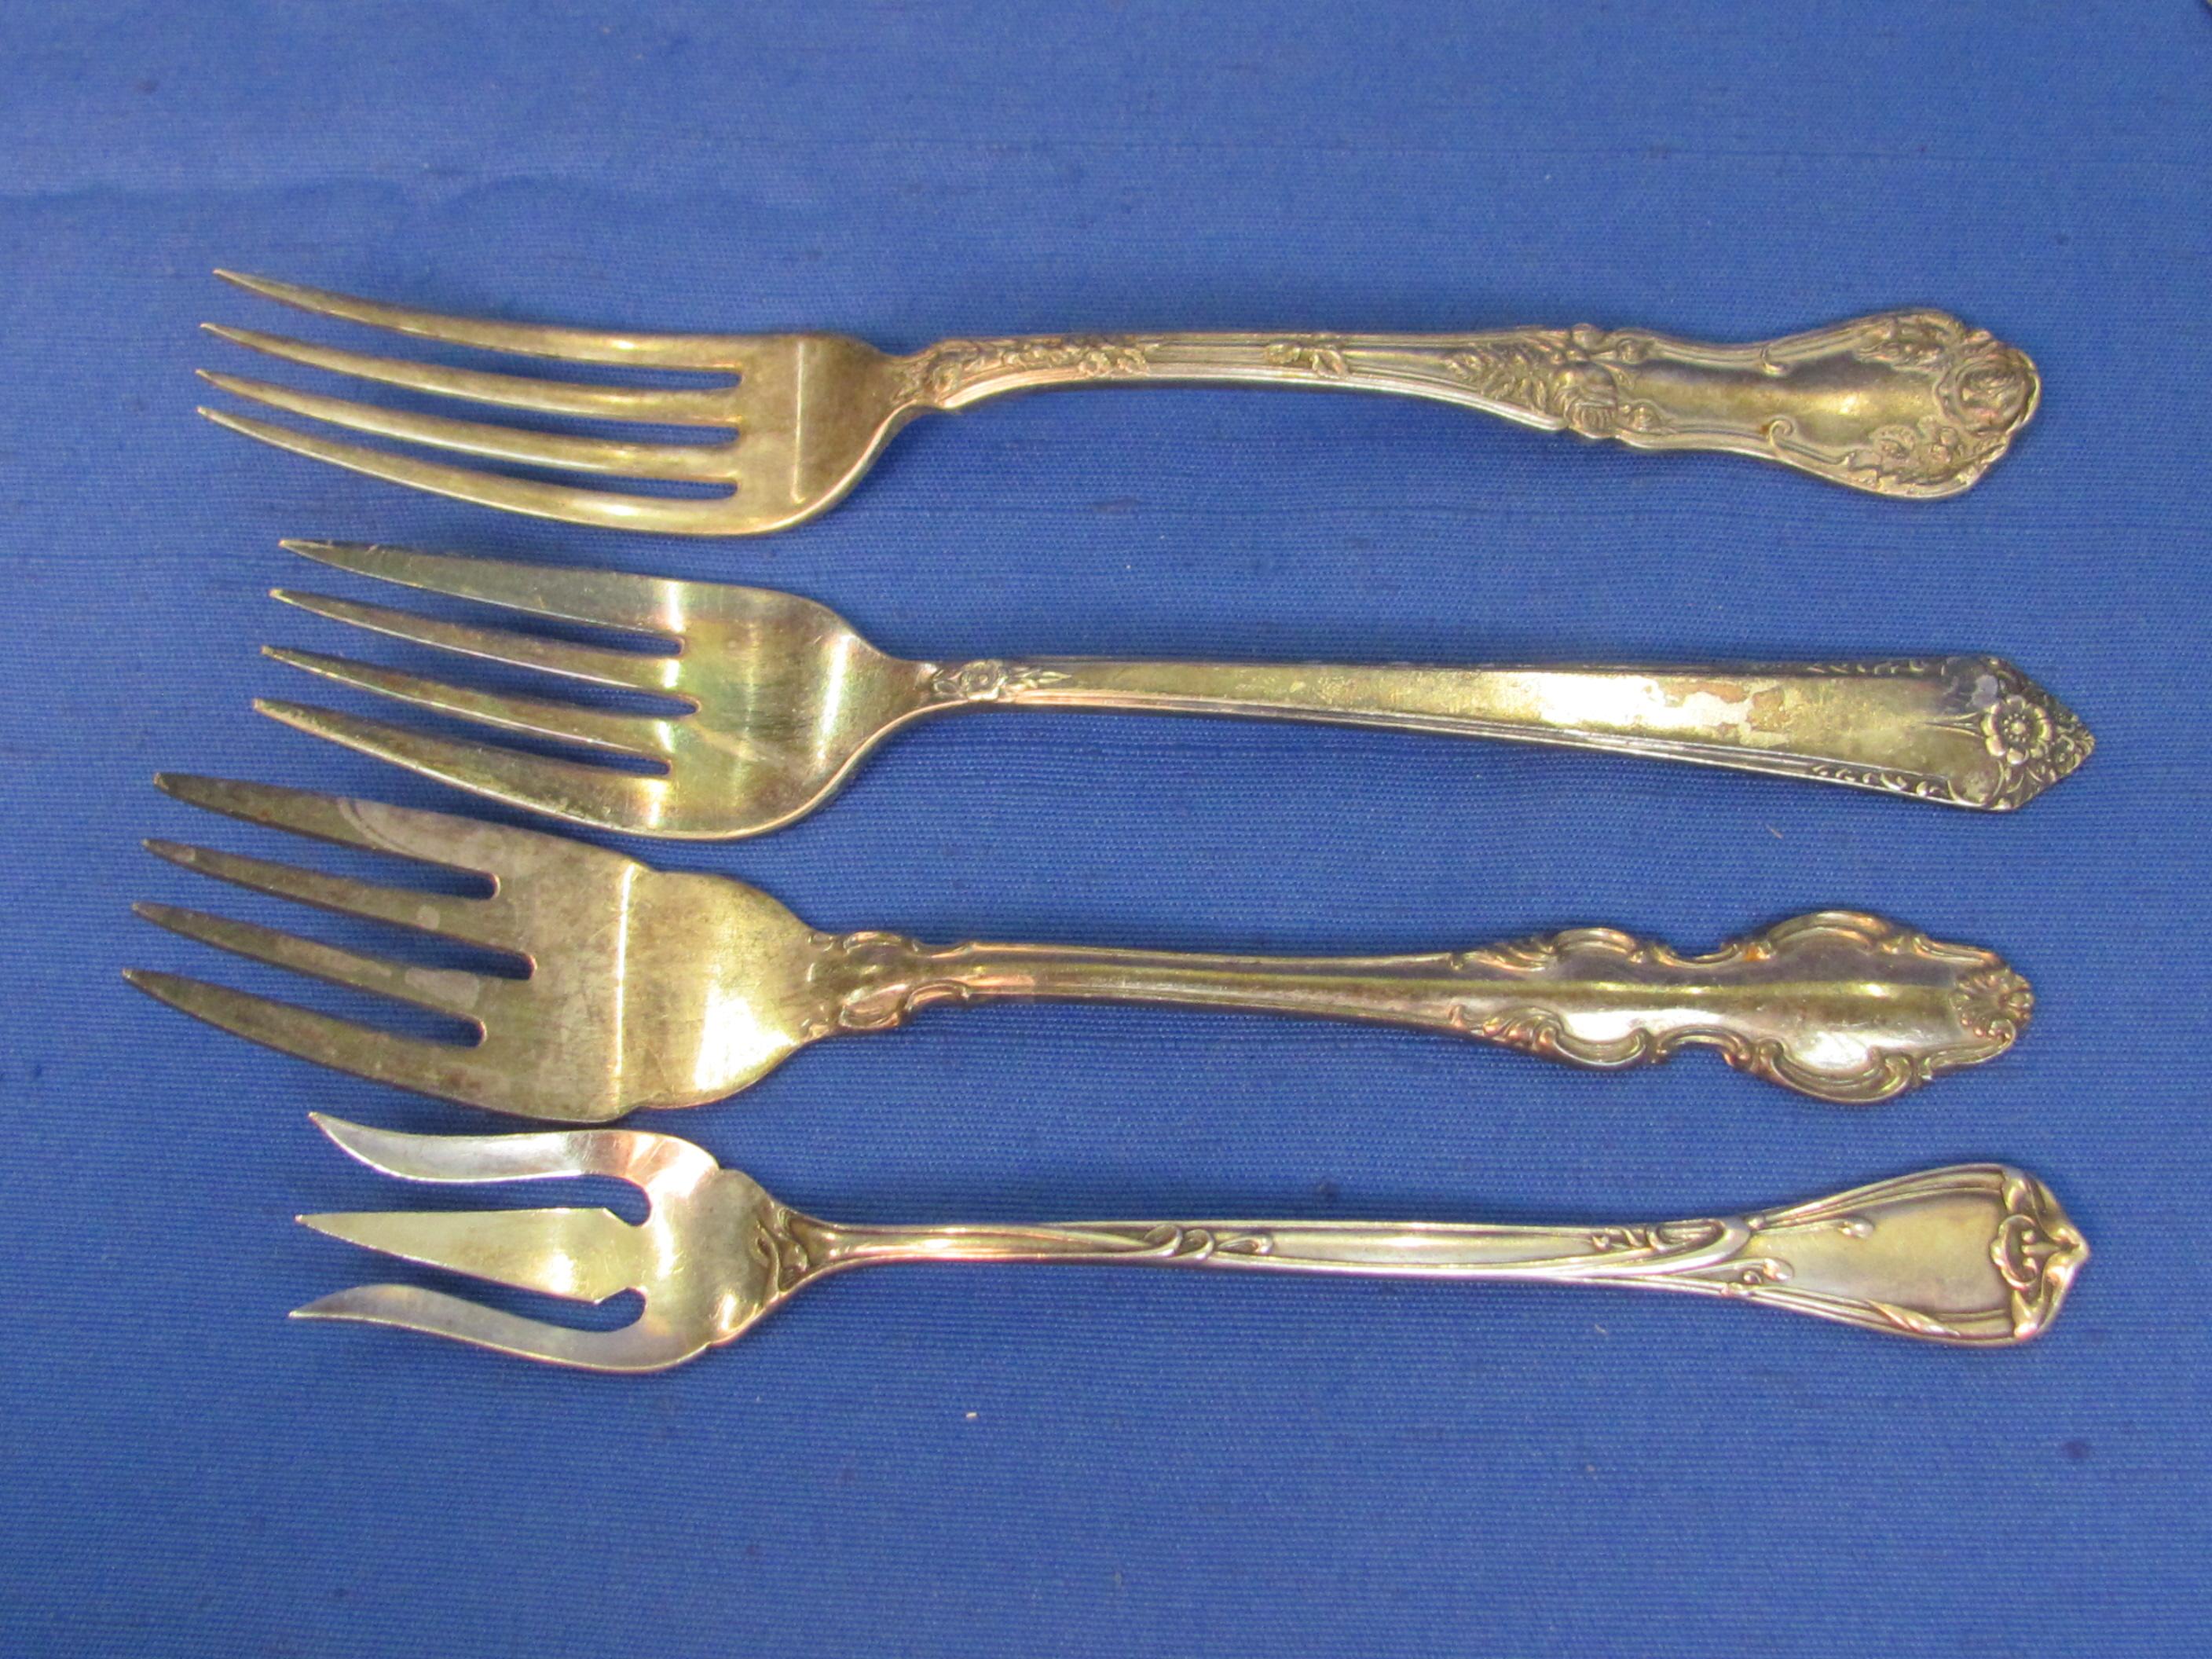 Mixed Lot of Vintage Silverplate Flatware: Spoons, Forks, Relish Forks